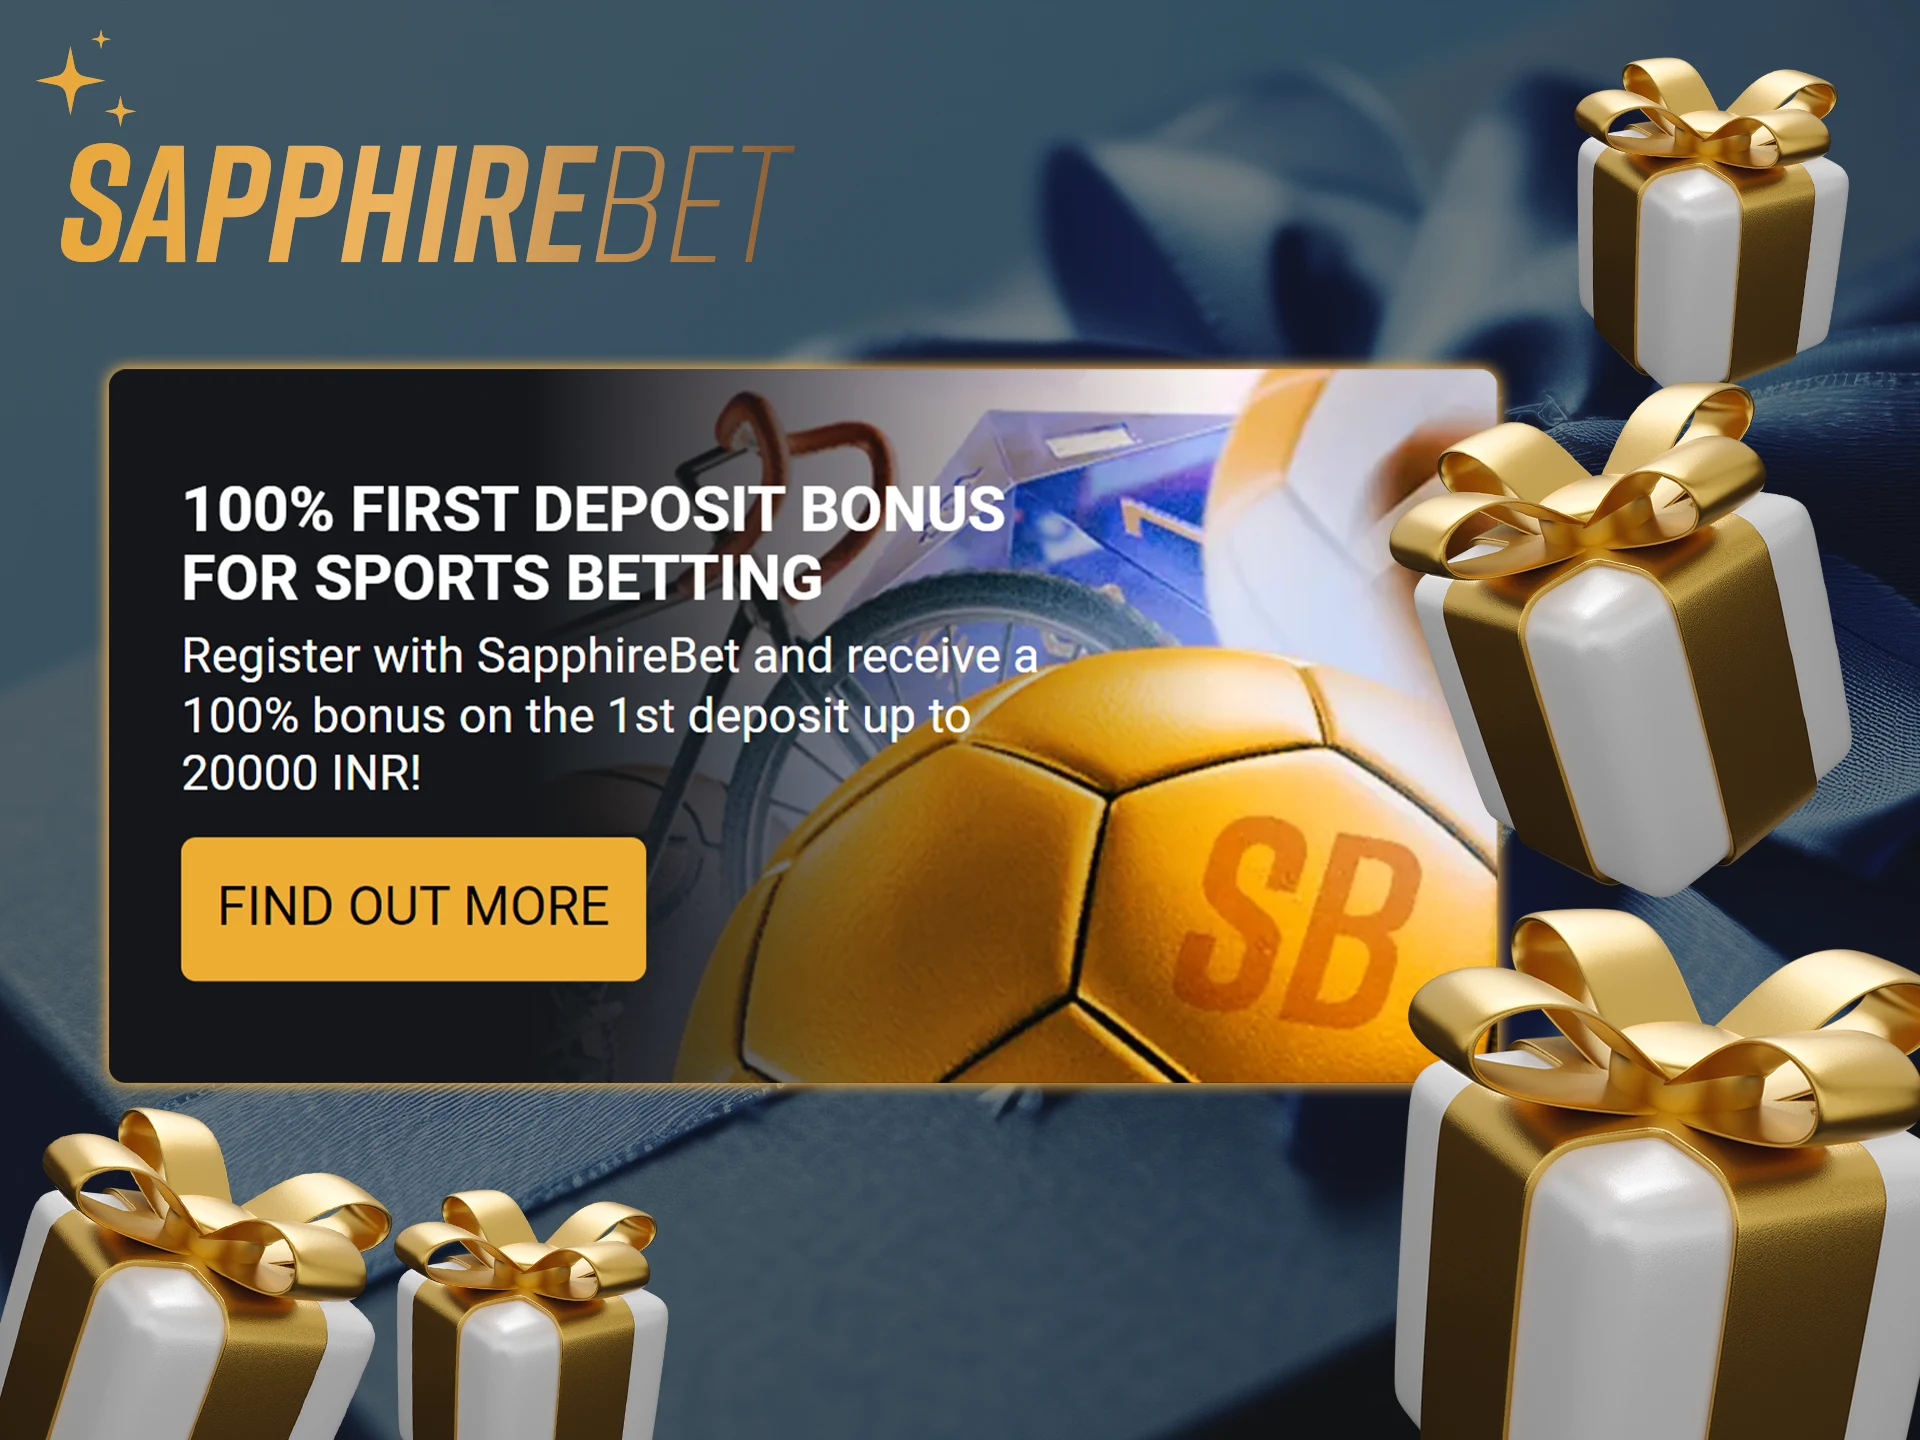 Top up your account balance and get the SapphireBet welcome bonus.